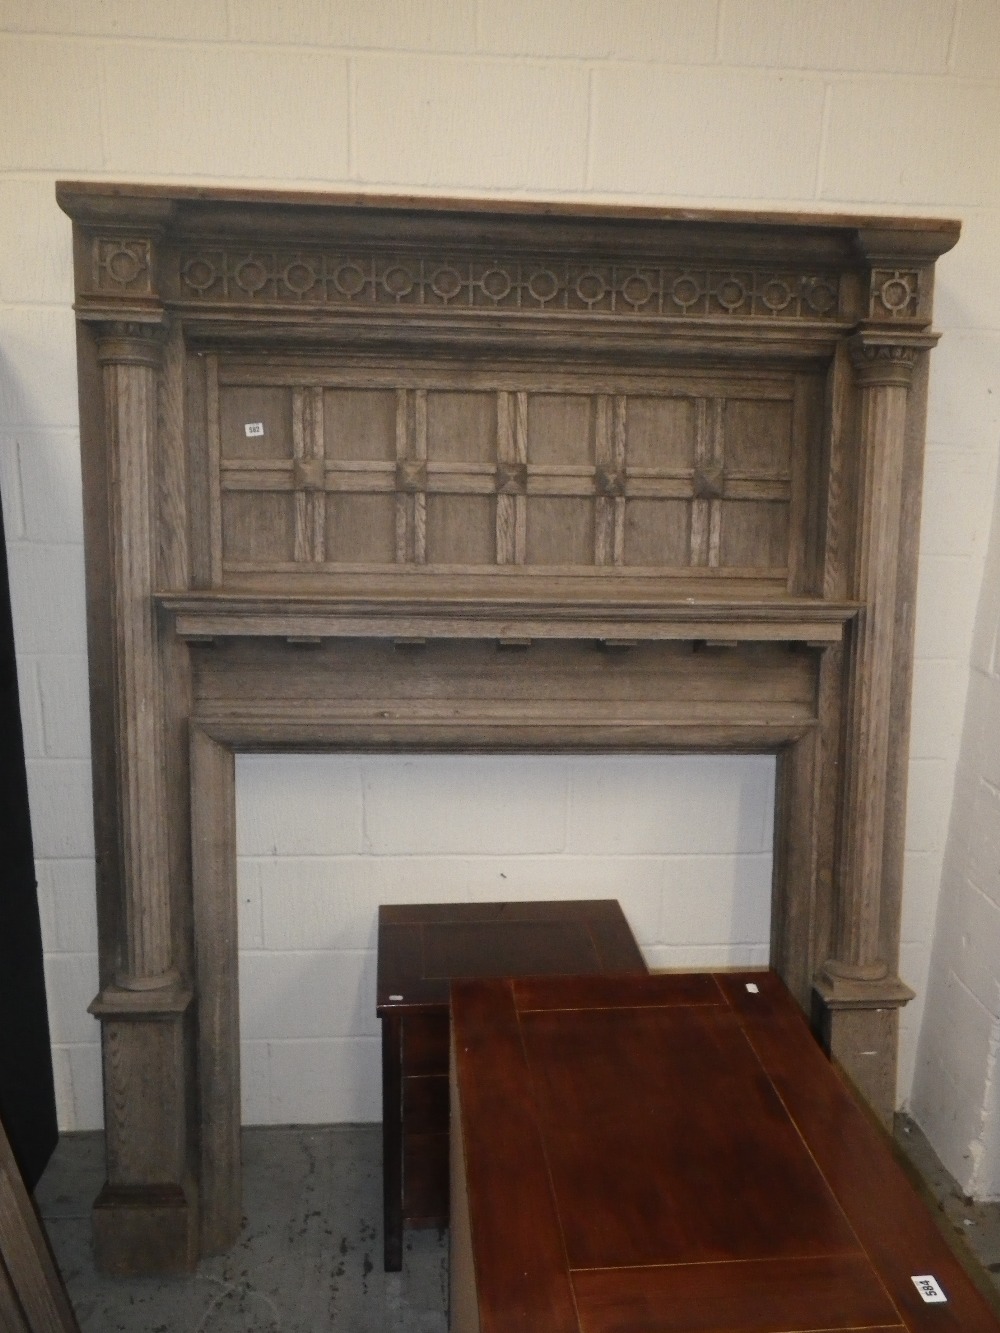 An early 20th century Jacobean Revival fire surround with fluted columns and panelled decoration